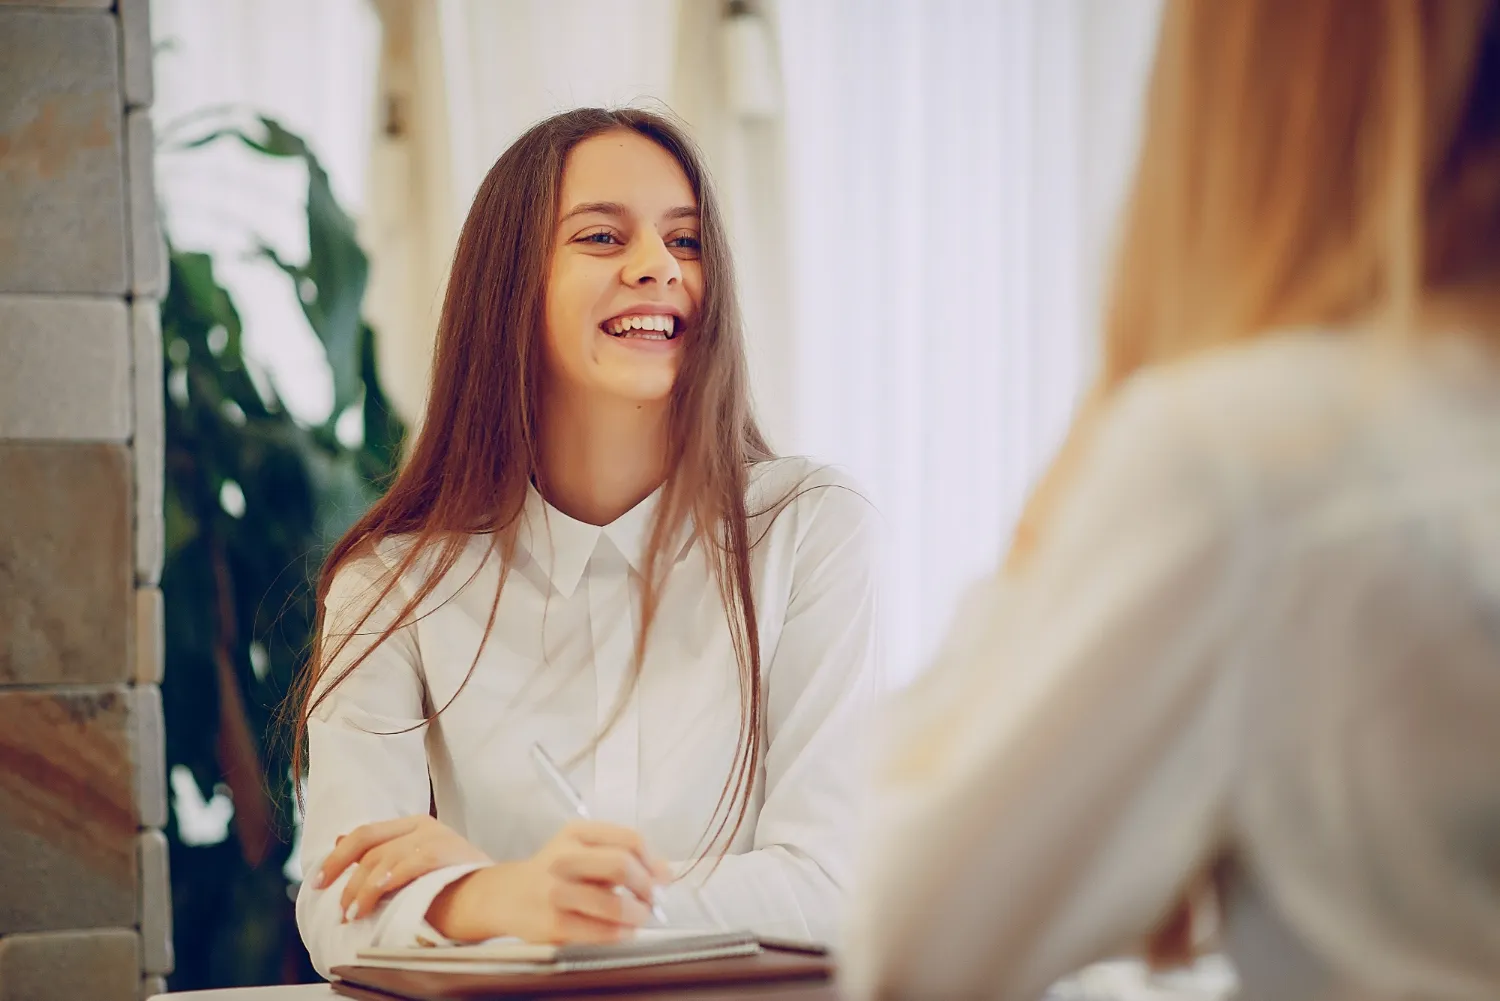 A cheerful candidate confidently engaging in a practice interview, embodying the proactive approach to preparation encouraged by JOH Partners for optimal interview performance.